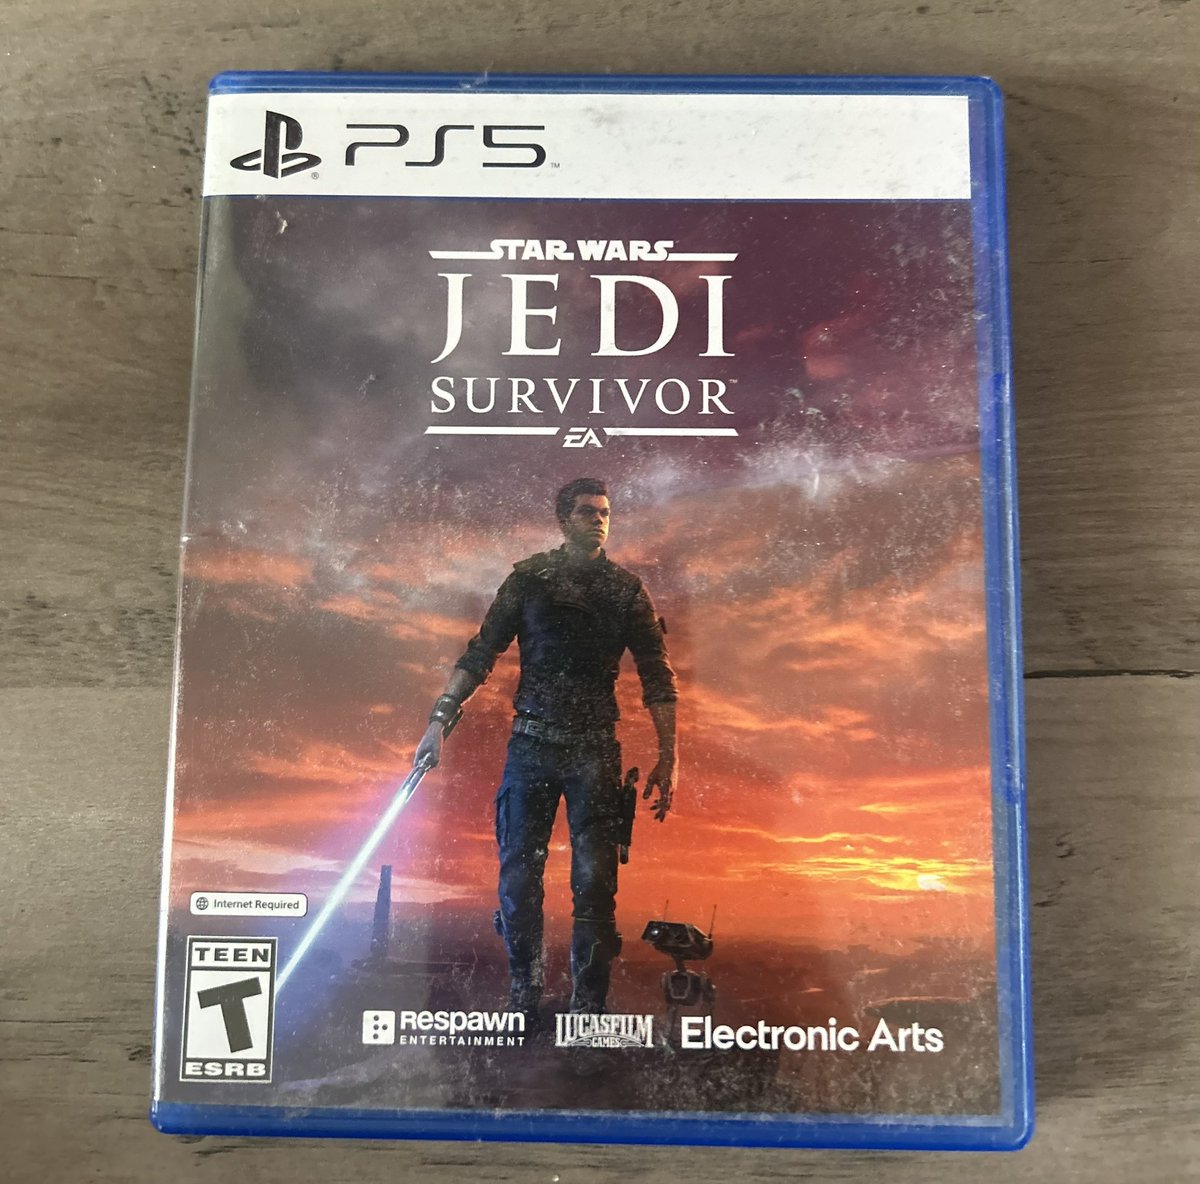 I know I am a day late for #May4thBeWithYou but I’ve been wanting to pick up this game since it was released. #JediSurvivor